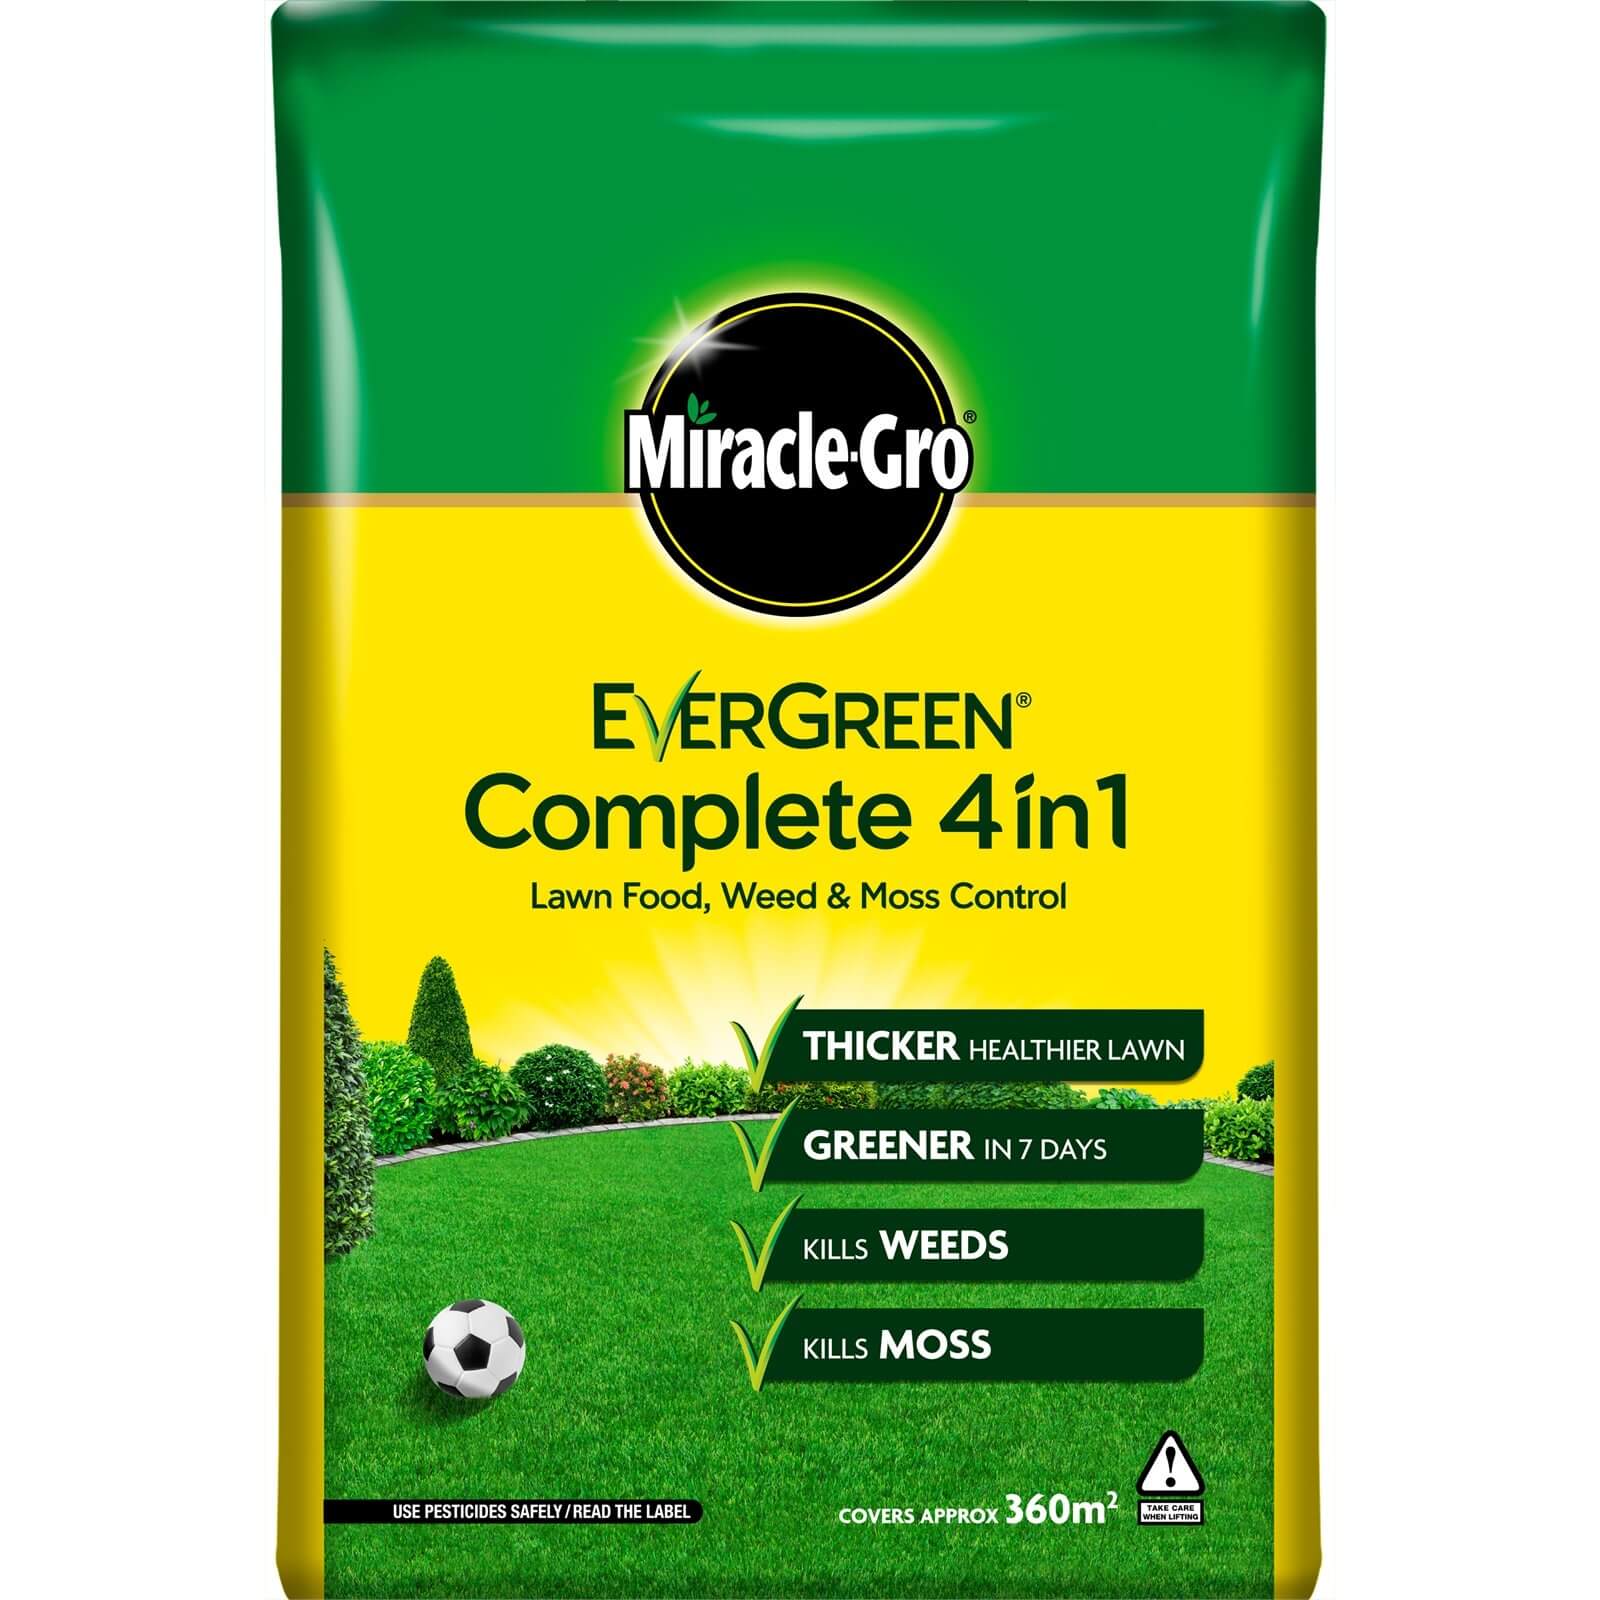 Miracle-Gro EverGreen Complete 4-in-1 Lawn Food, Weed & Moss Killer - 360m²